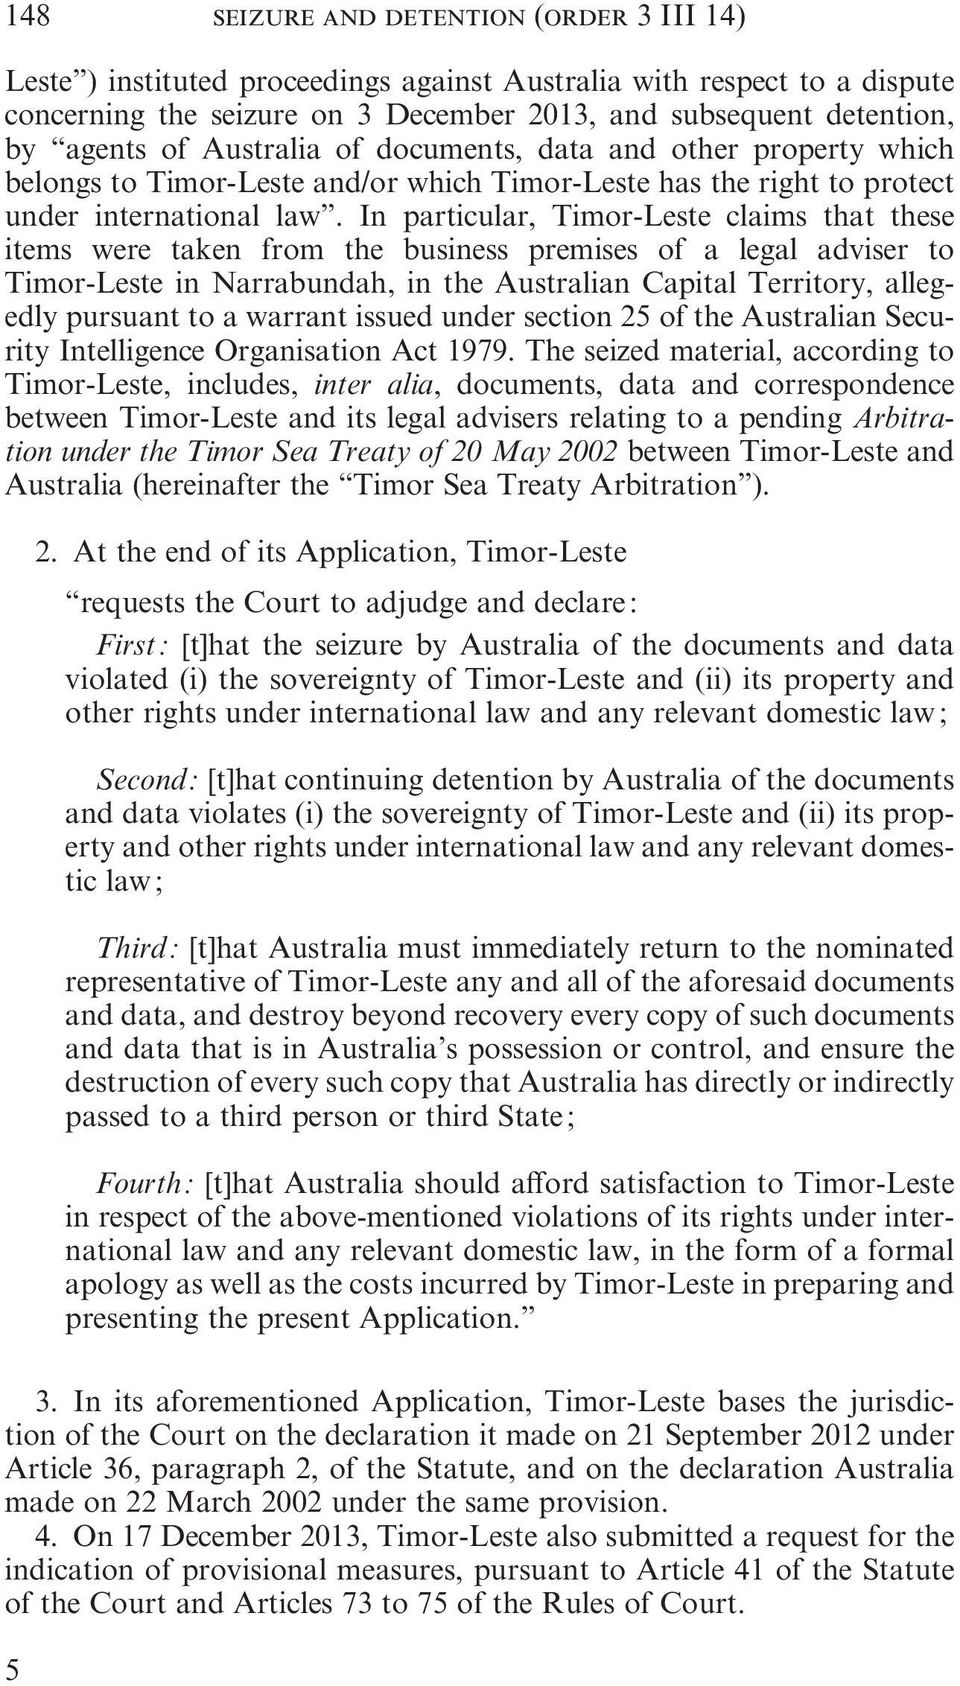 In particular, Timor Leste claims that these items were taken from the business premises of a legal adviser to Timor Leste in Narrabundah, in the Australian Capital Territory, allegedly pursuant to a